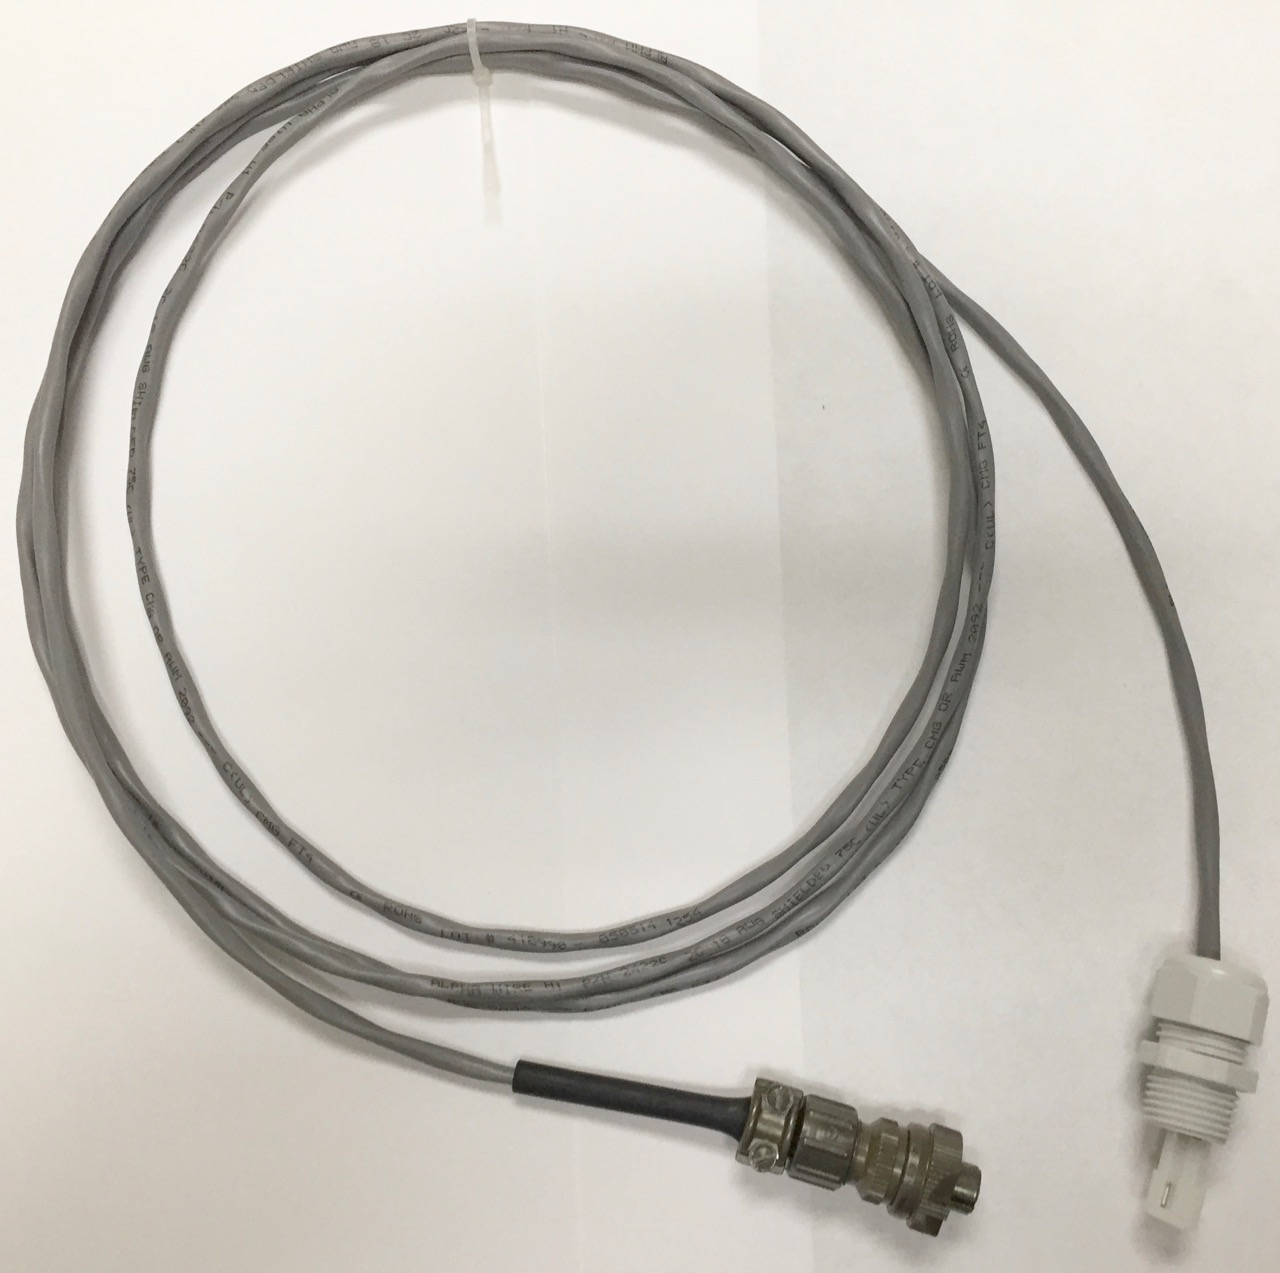 TI 10’ Cable Assembly with Straight Amphenol Connector (10354-02/10)